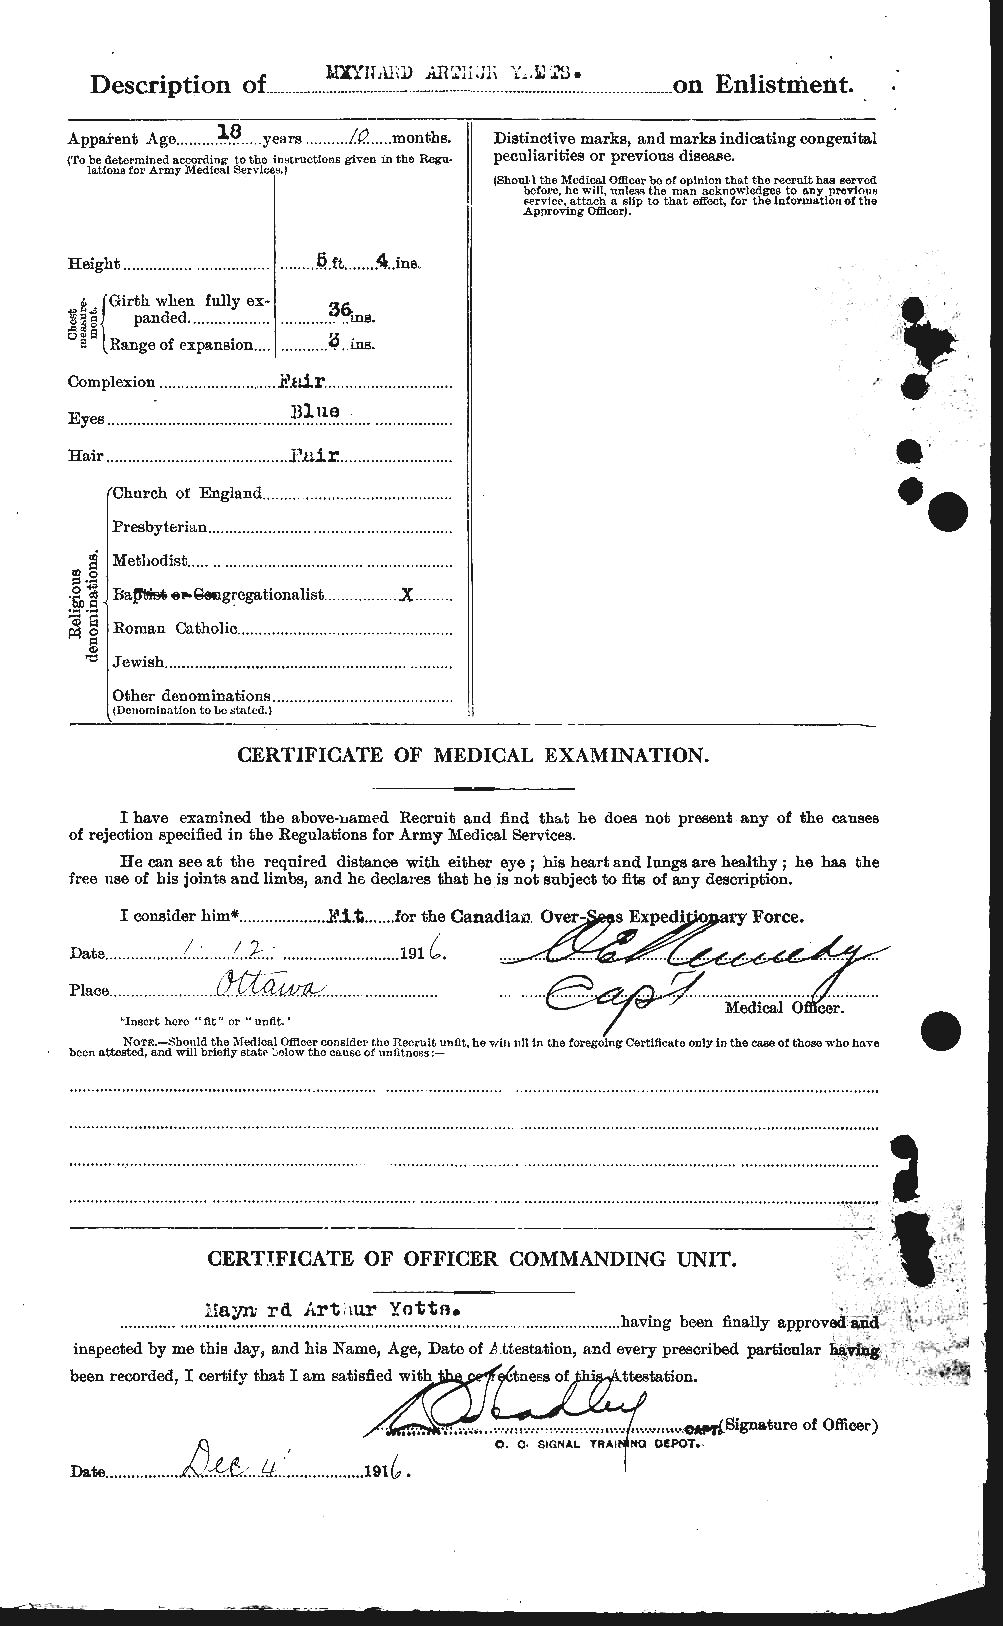 Personnel Records of the First World War - CEF 686473b